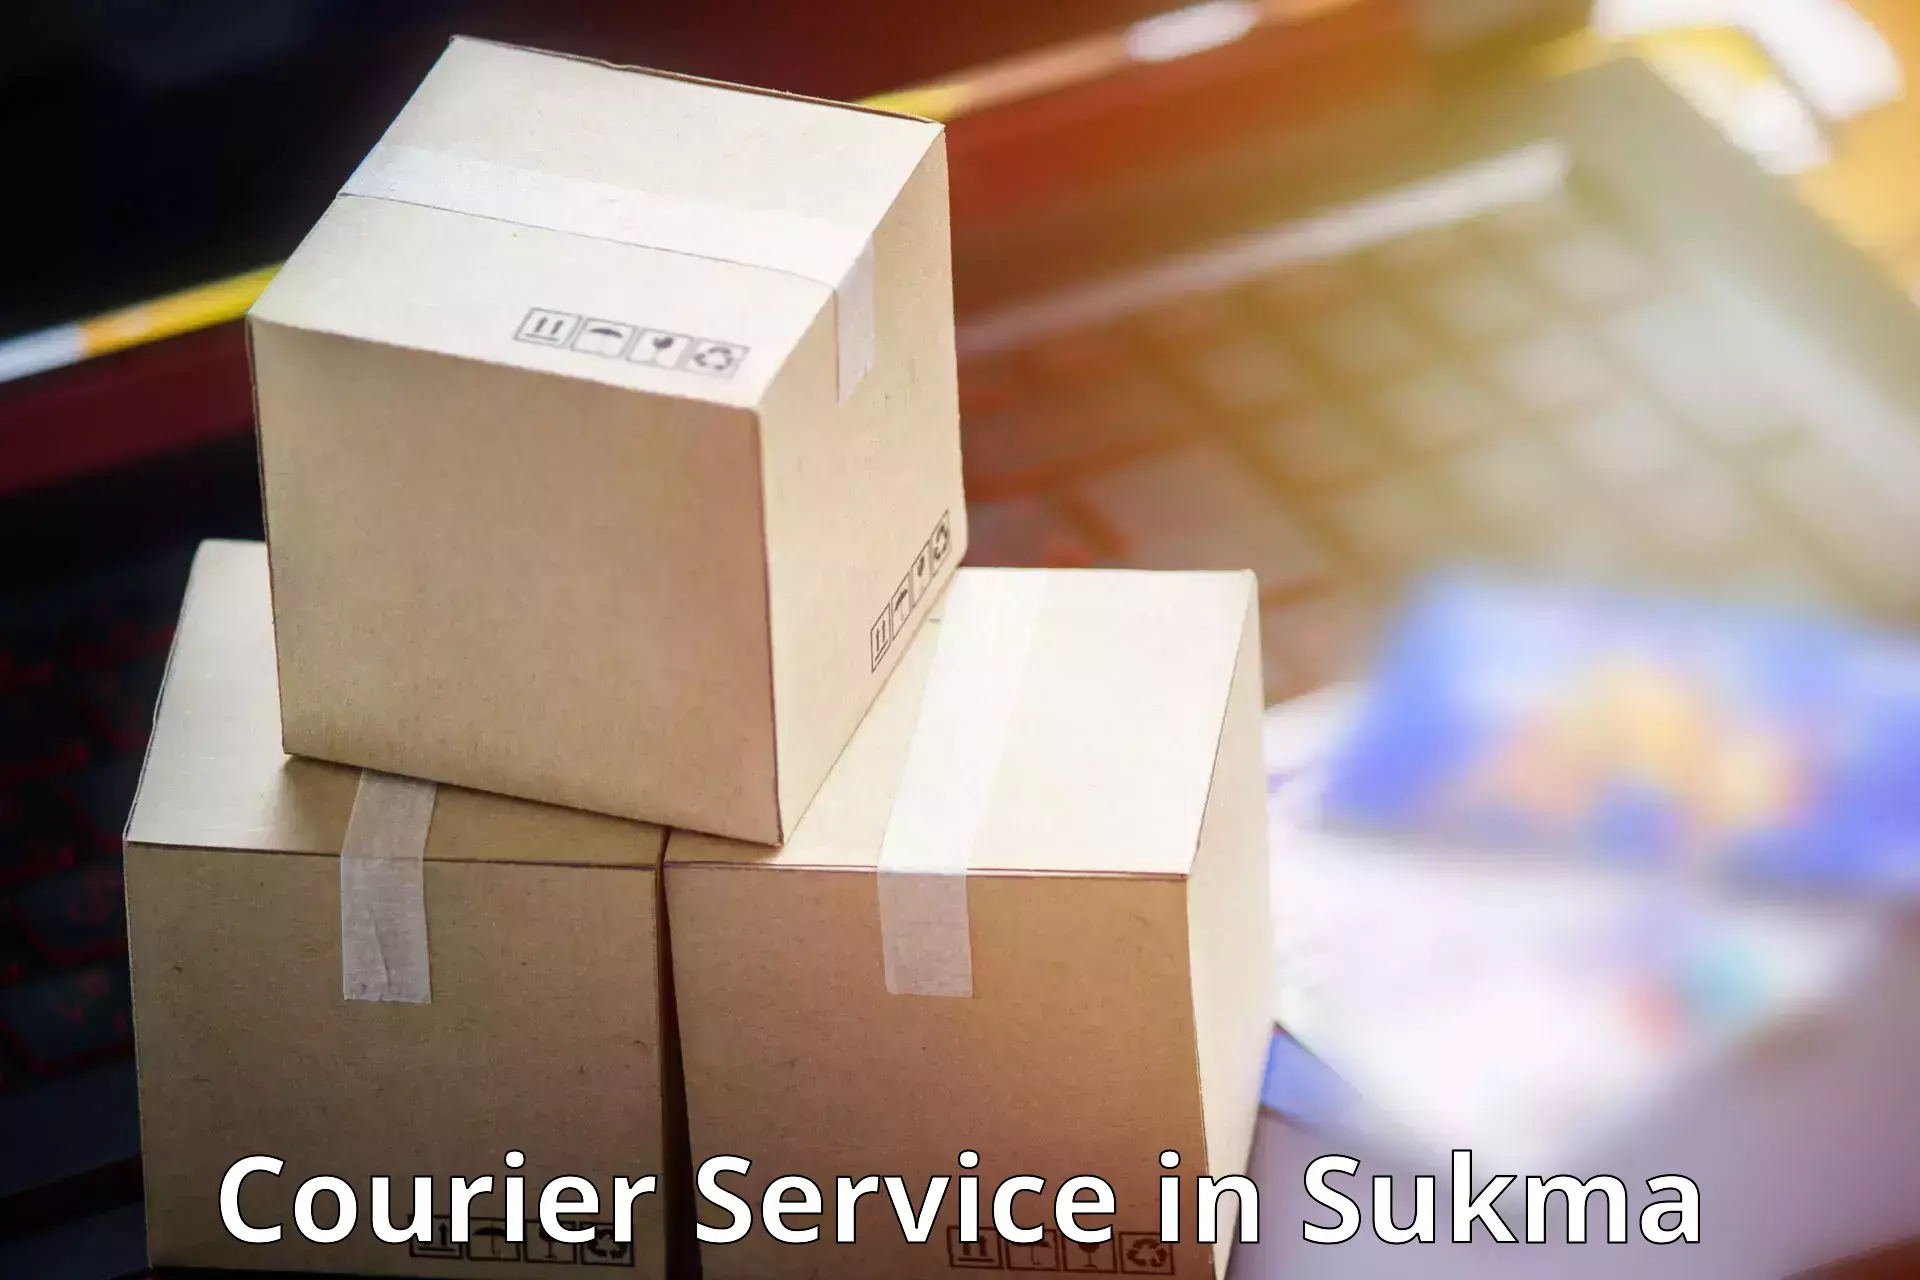 Secure package delivery in Sukma